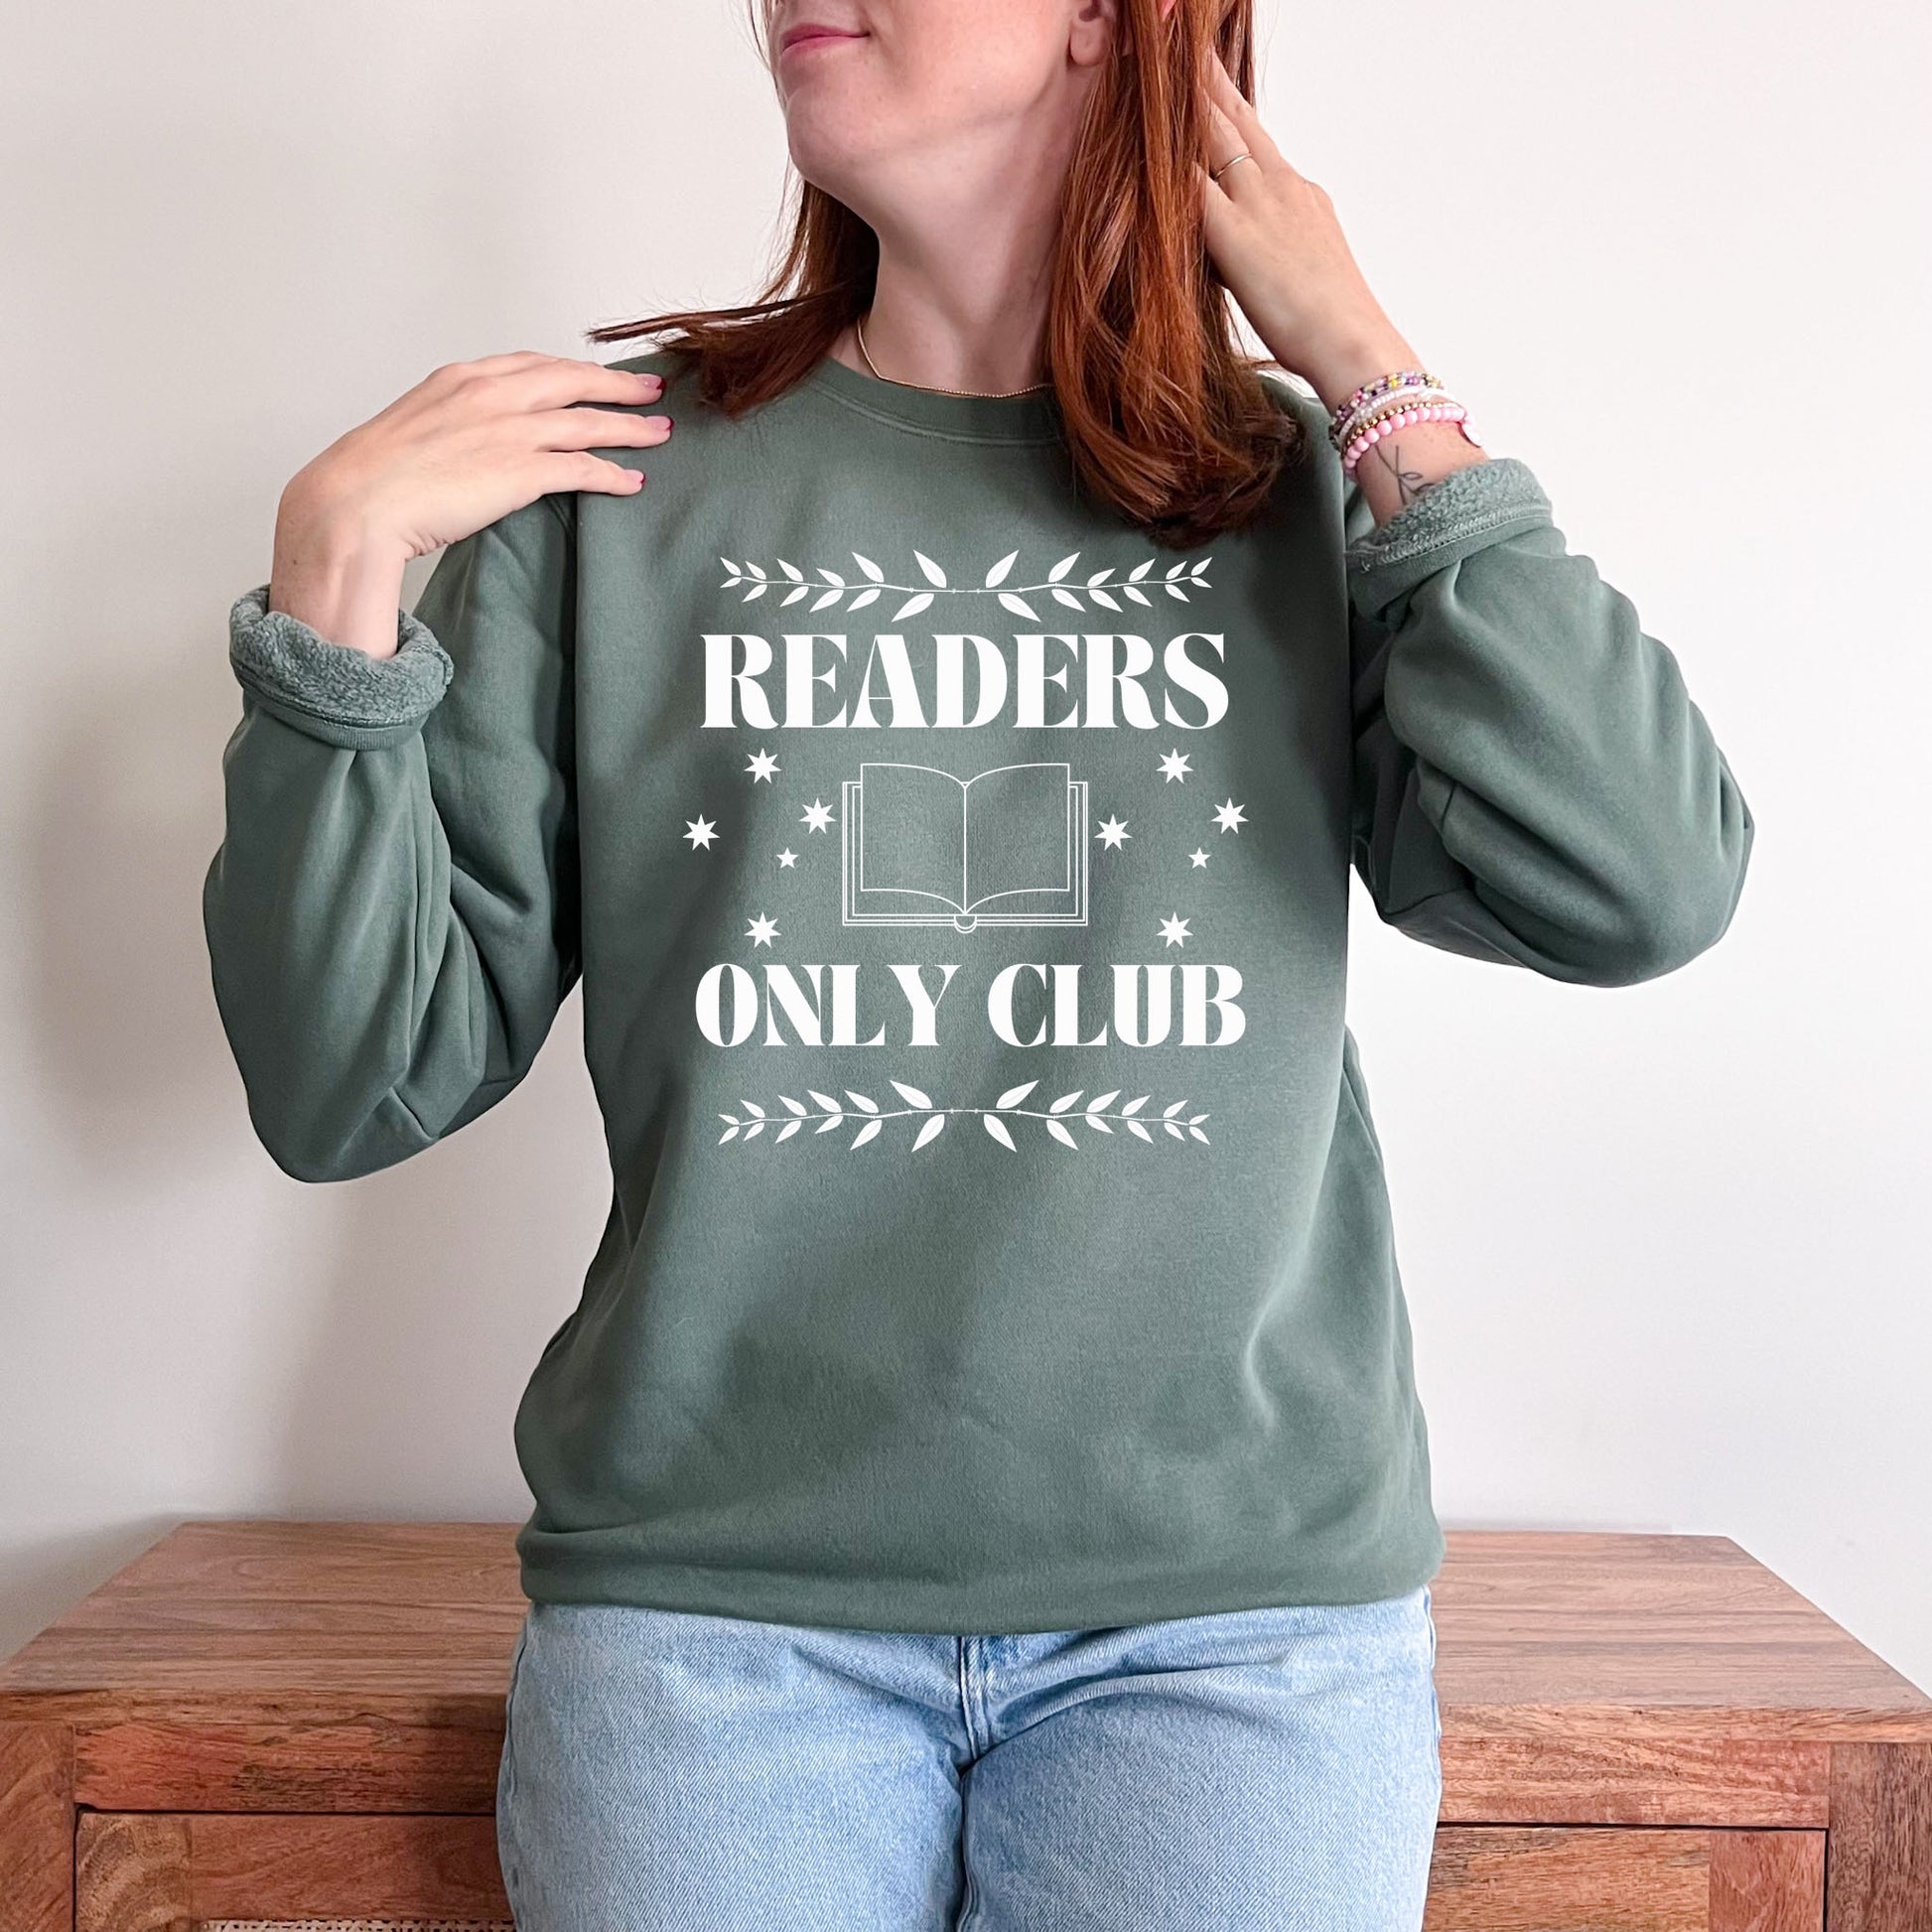 Readers Only Club - Busy Ferns